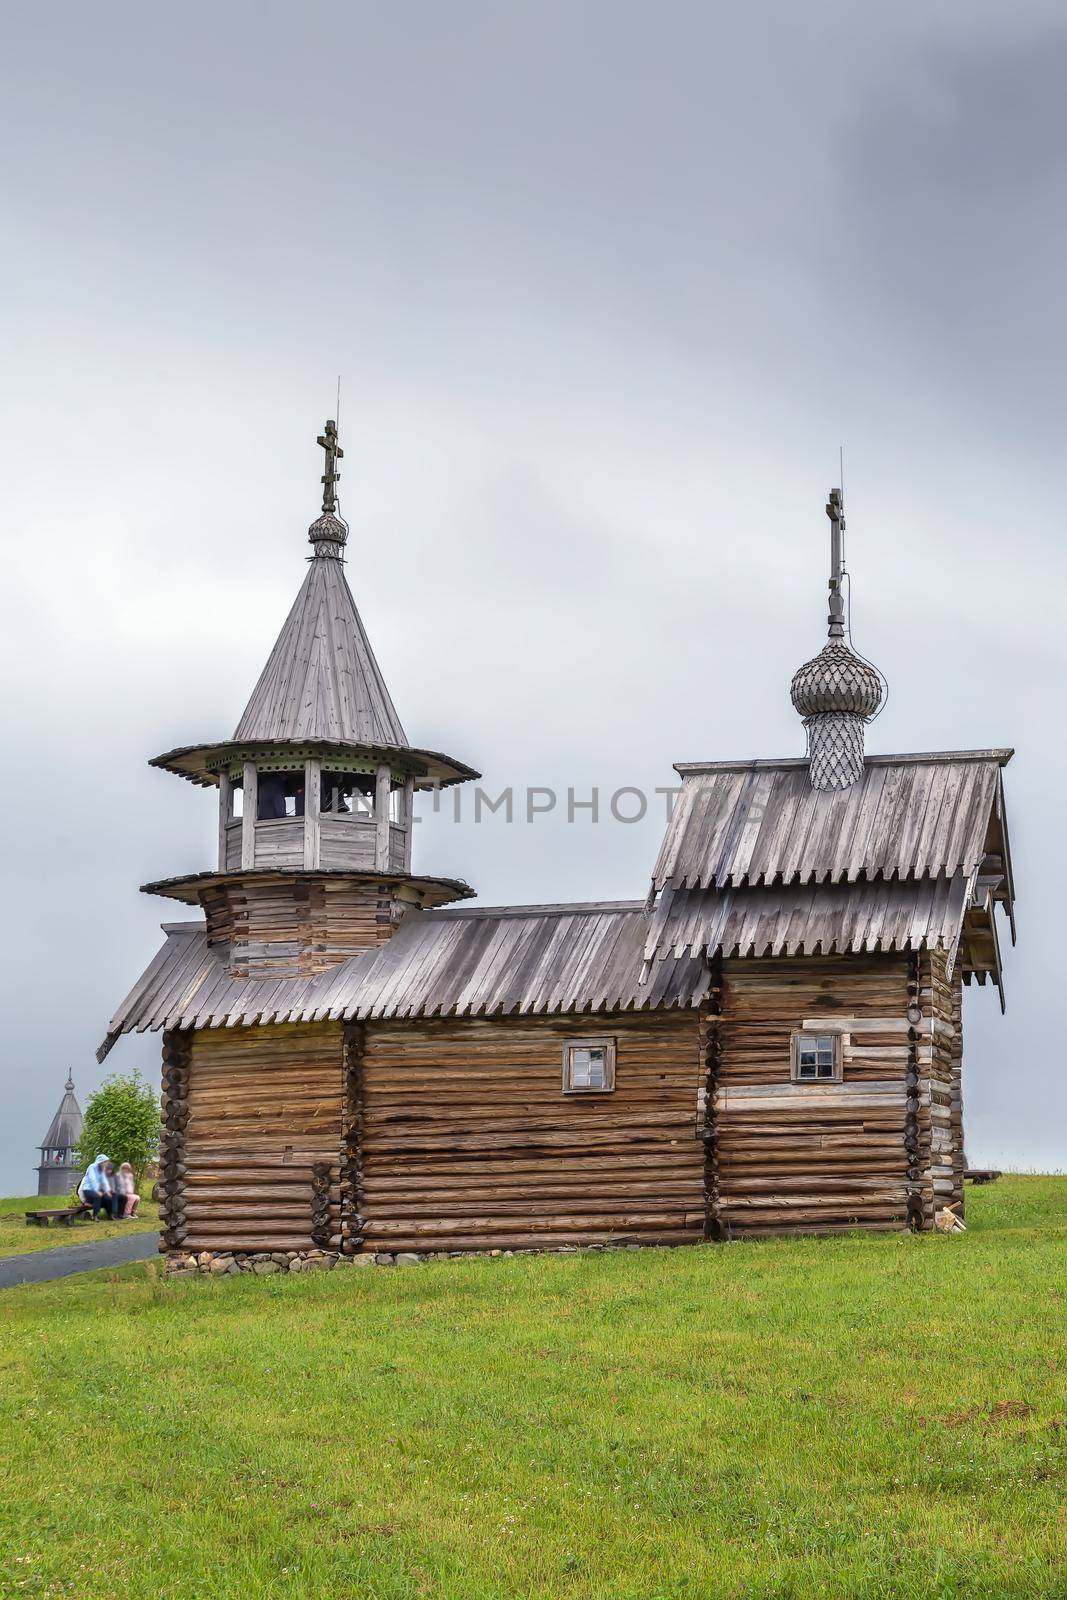 Historical site dating from the 17th century on Kizhi island, Russia. Chapel of the Archangel Michael